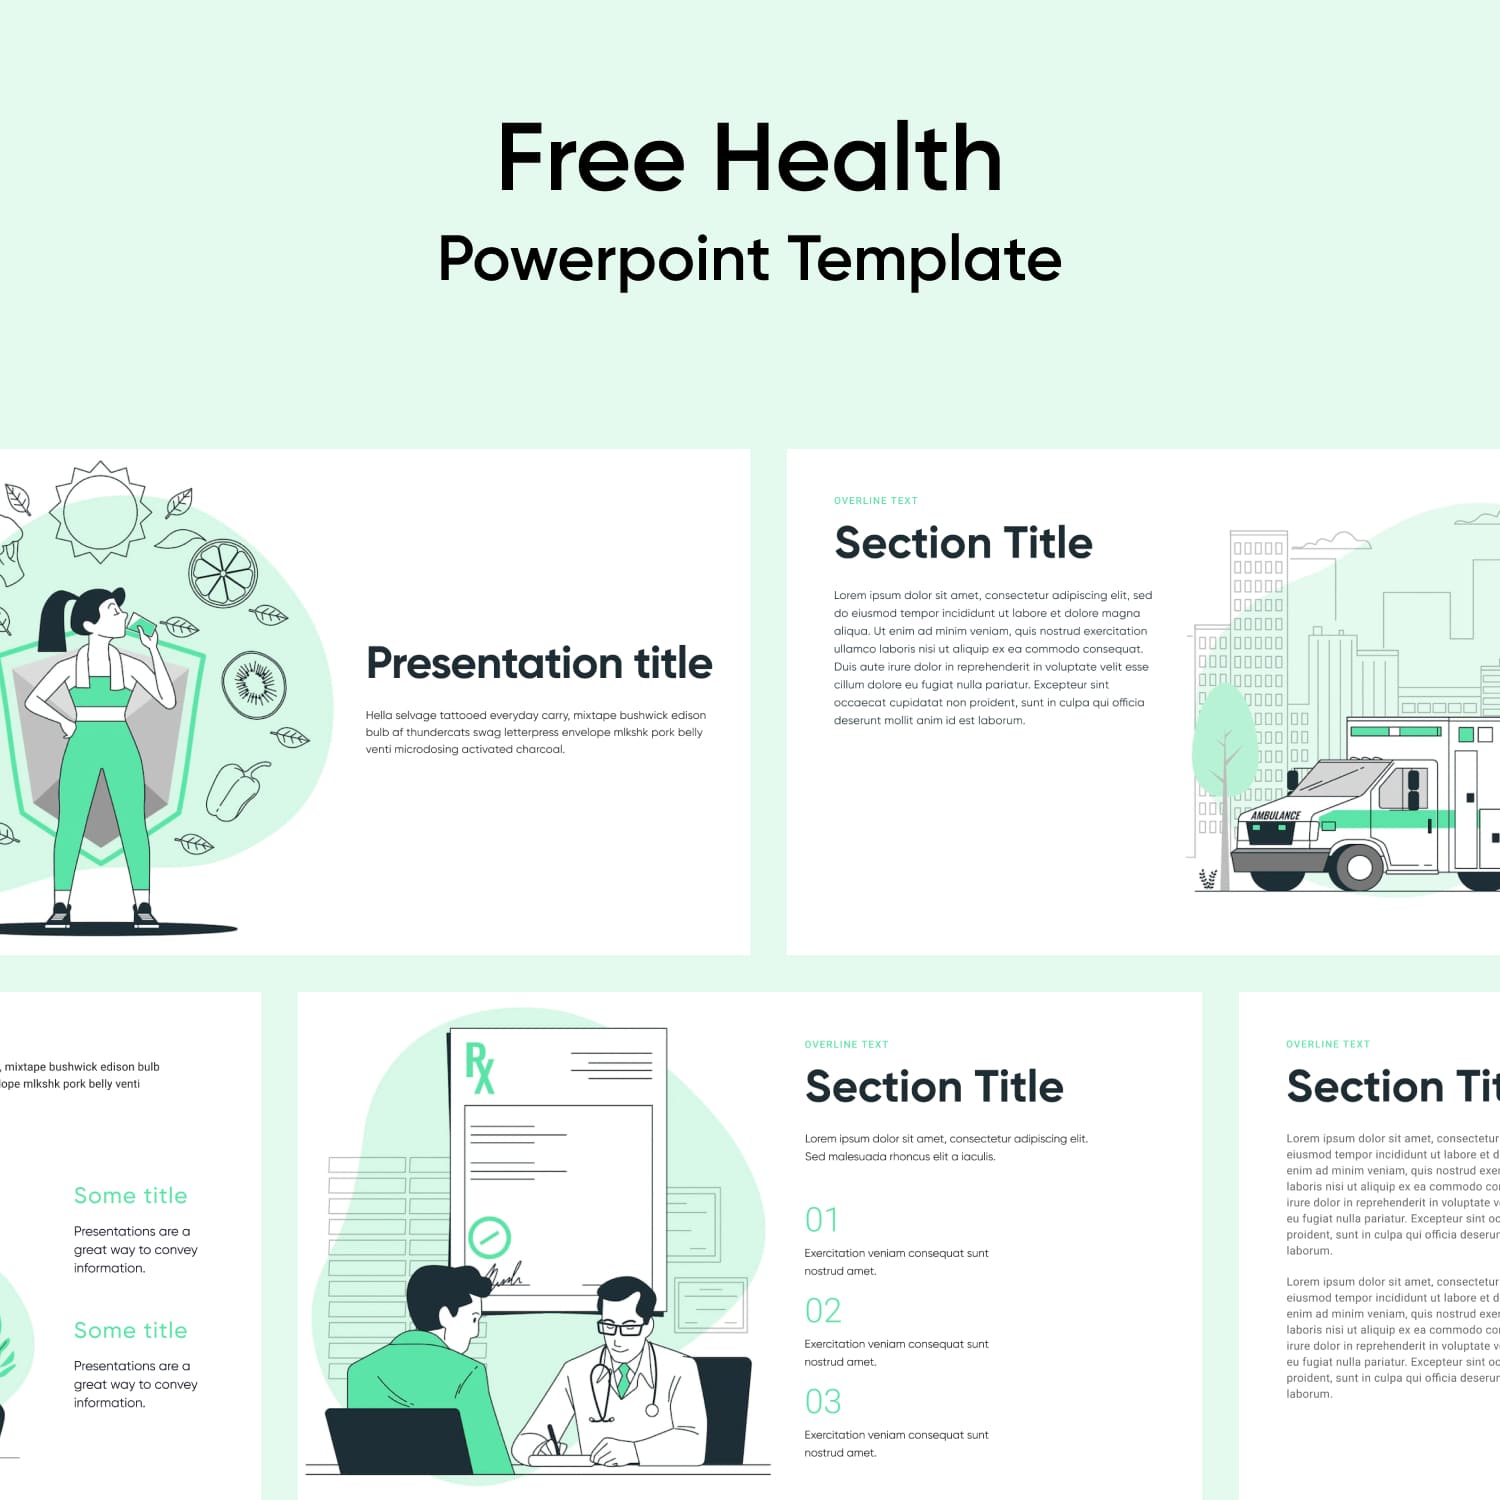 Images with Health Powerpoint Template.